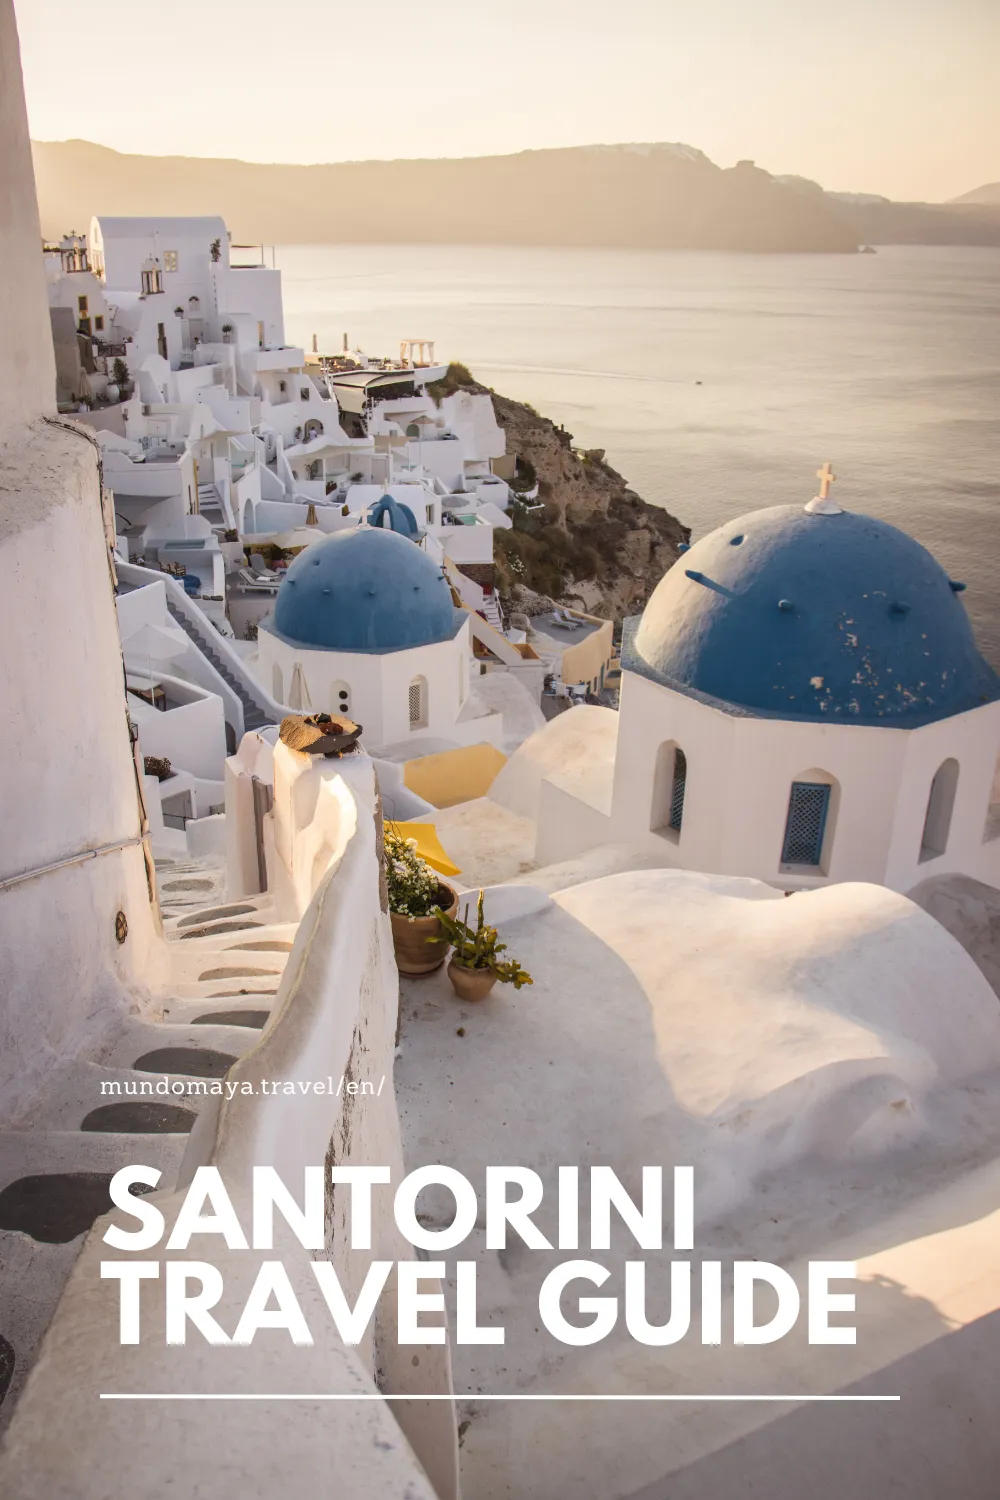 Santorini Travel Guide – How to Plan the Perfect Trip